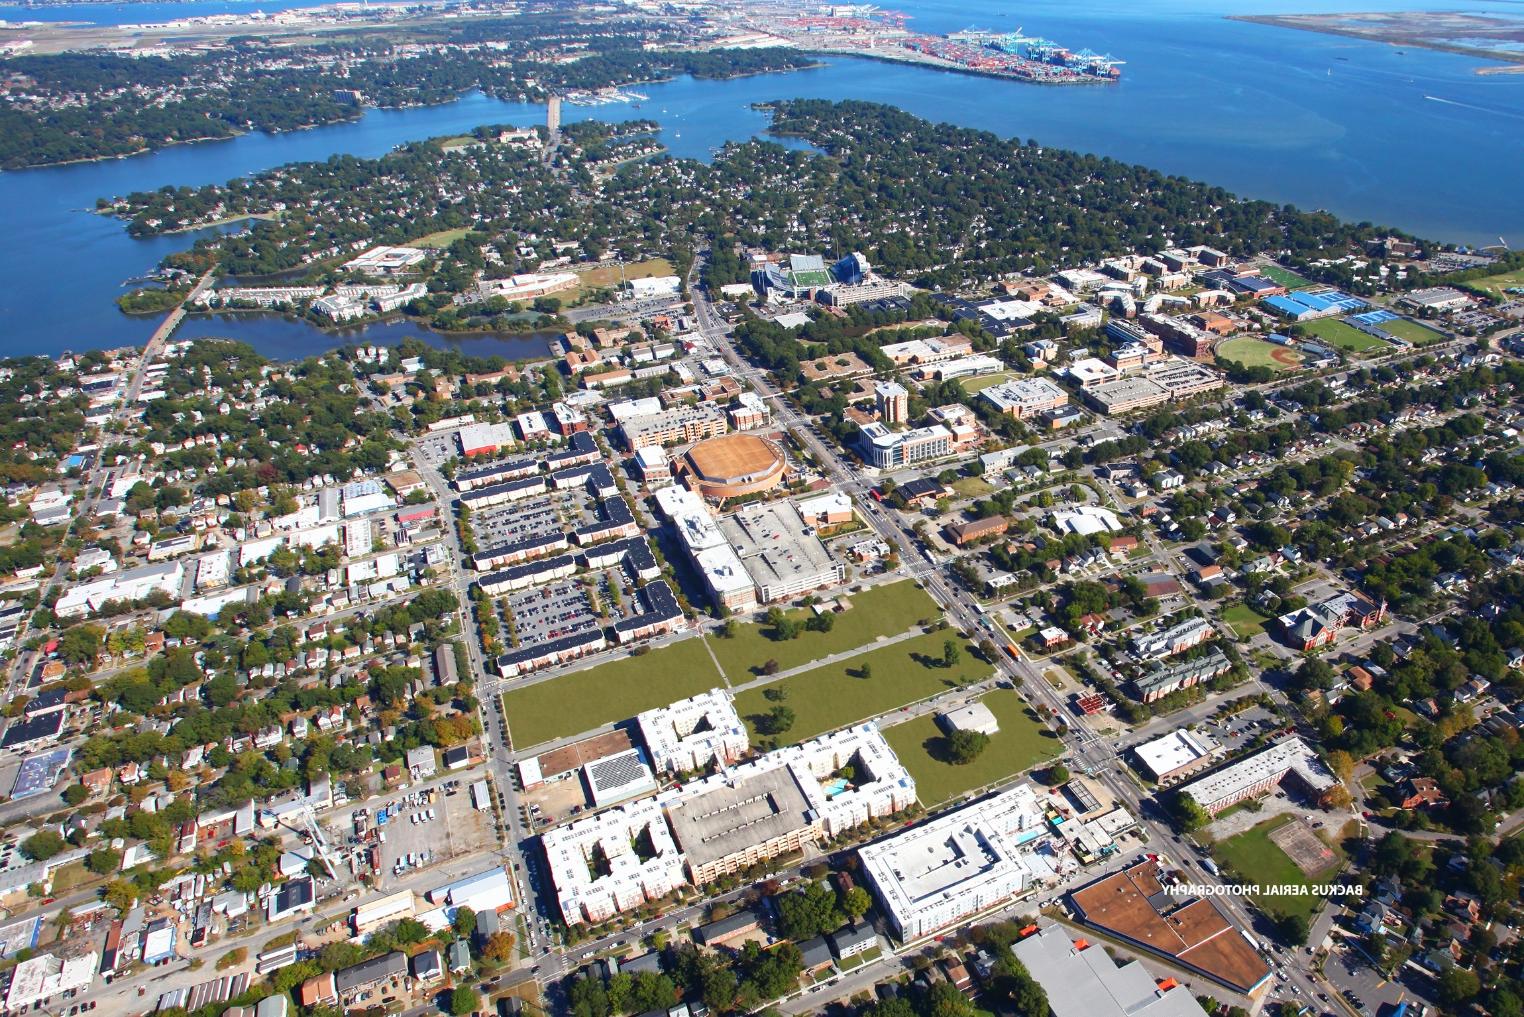 drone image of ODU campus